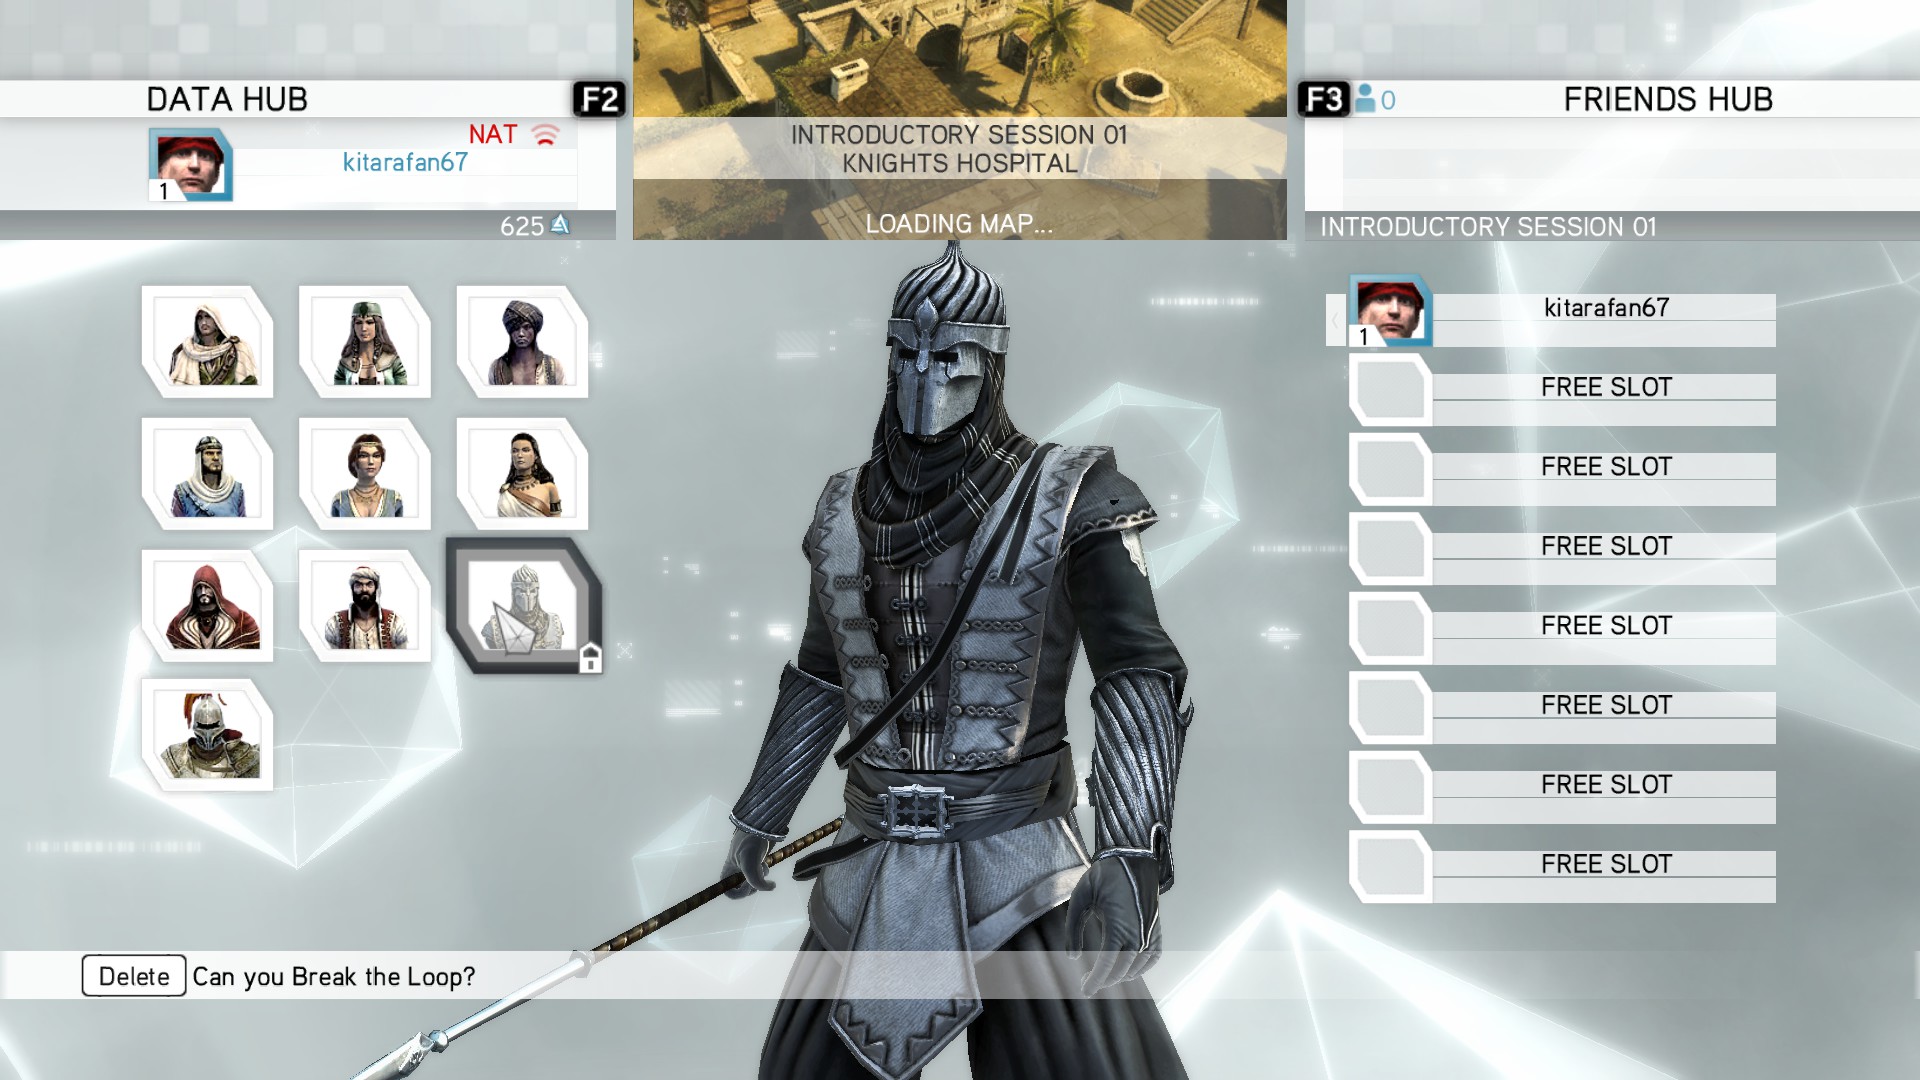 Assassin's Creed Revelations - The Ancestors Character Pack on Steam